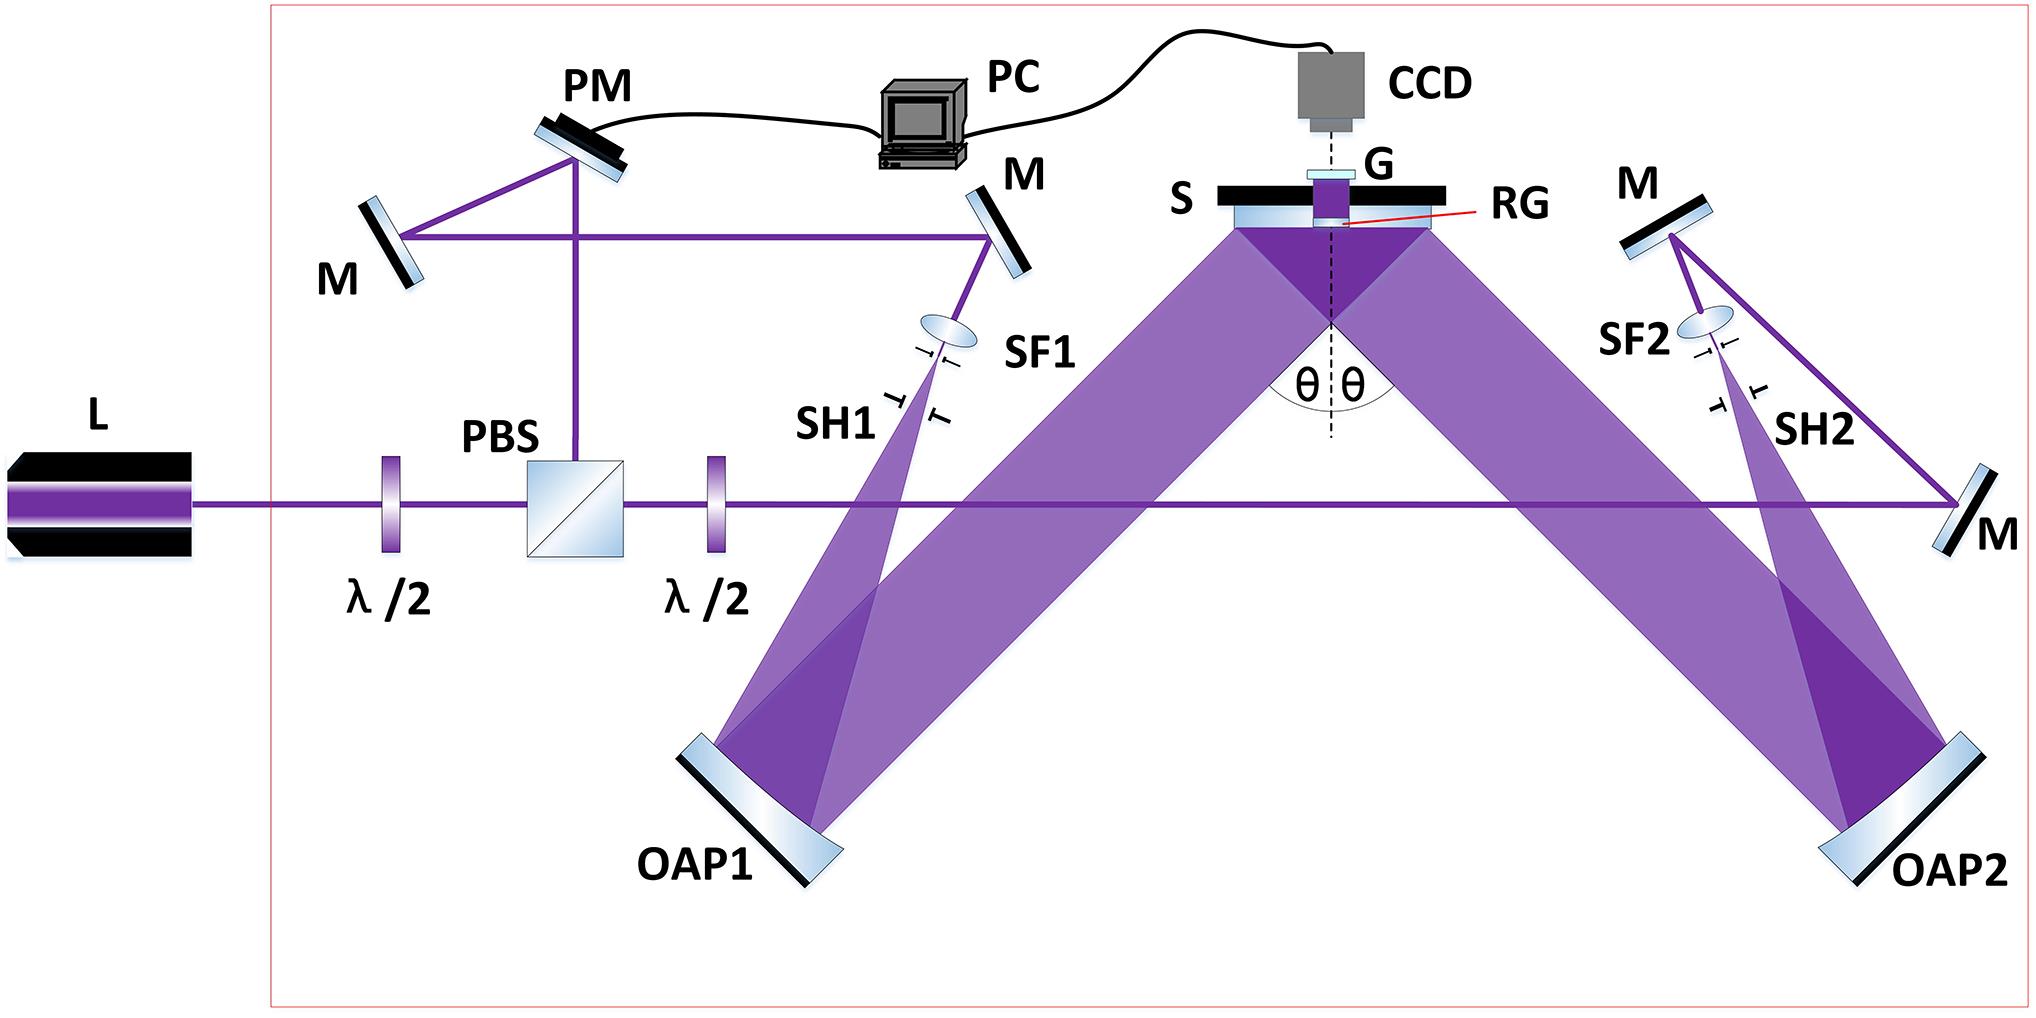 Setup of two-beam interference lithography for MLD gratings. L, Kr+ laser; M, mirror; PM, piezo mirror; λ/2, polarization rotator (e.g., half-wave plate); PBS, polarizing beam splitter; SF, spatial filter; SH, shutter; OAP, off-axis parabolic mirror; S, substrate with mount; RG, reference grating; G, ground glass.